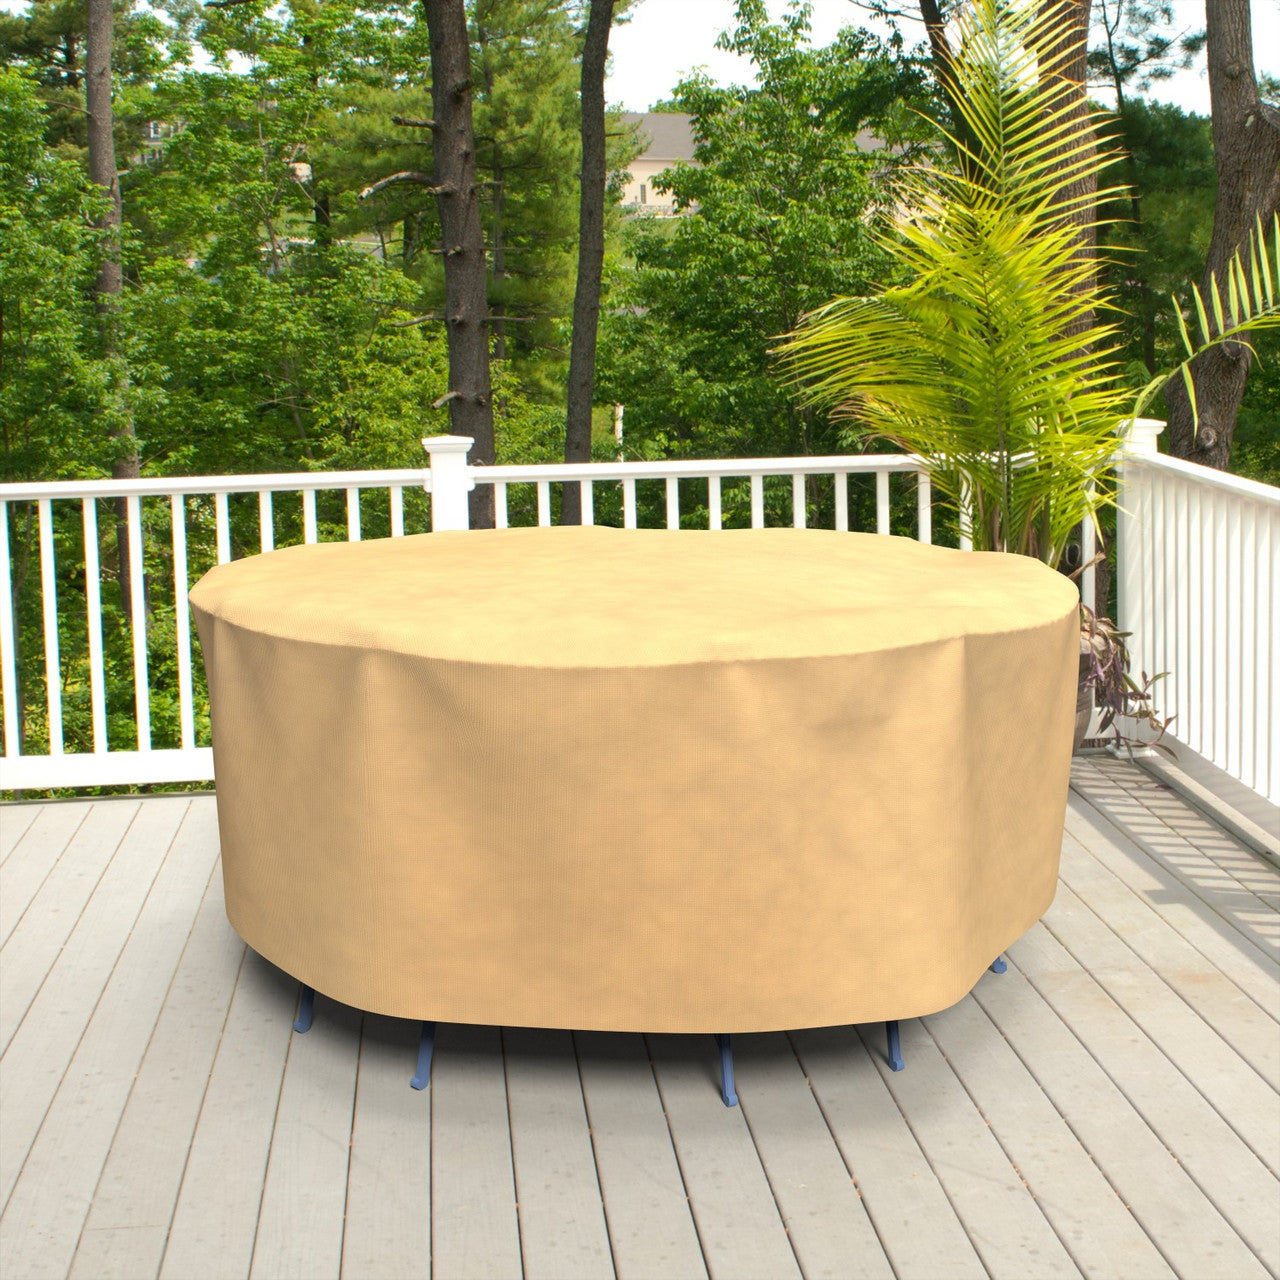 Budge Industries All Seasons Round Table/Chair Combo Cover